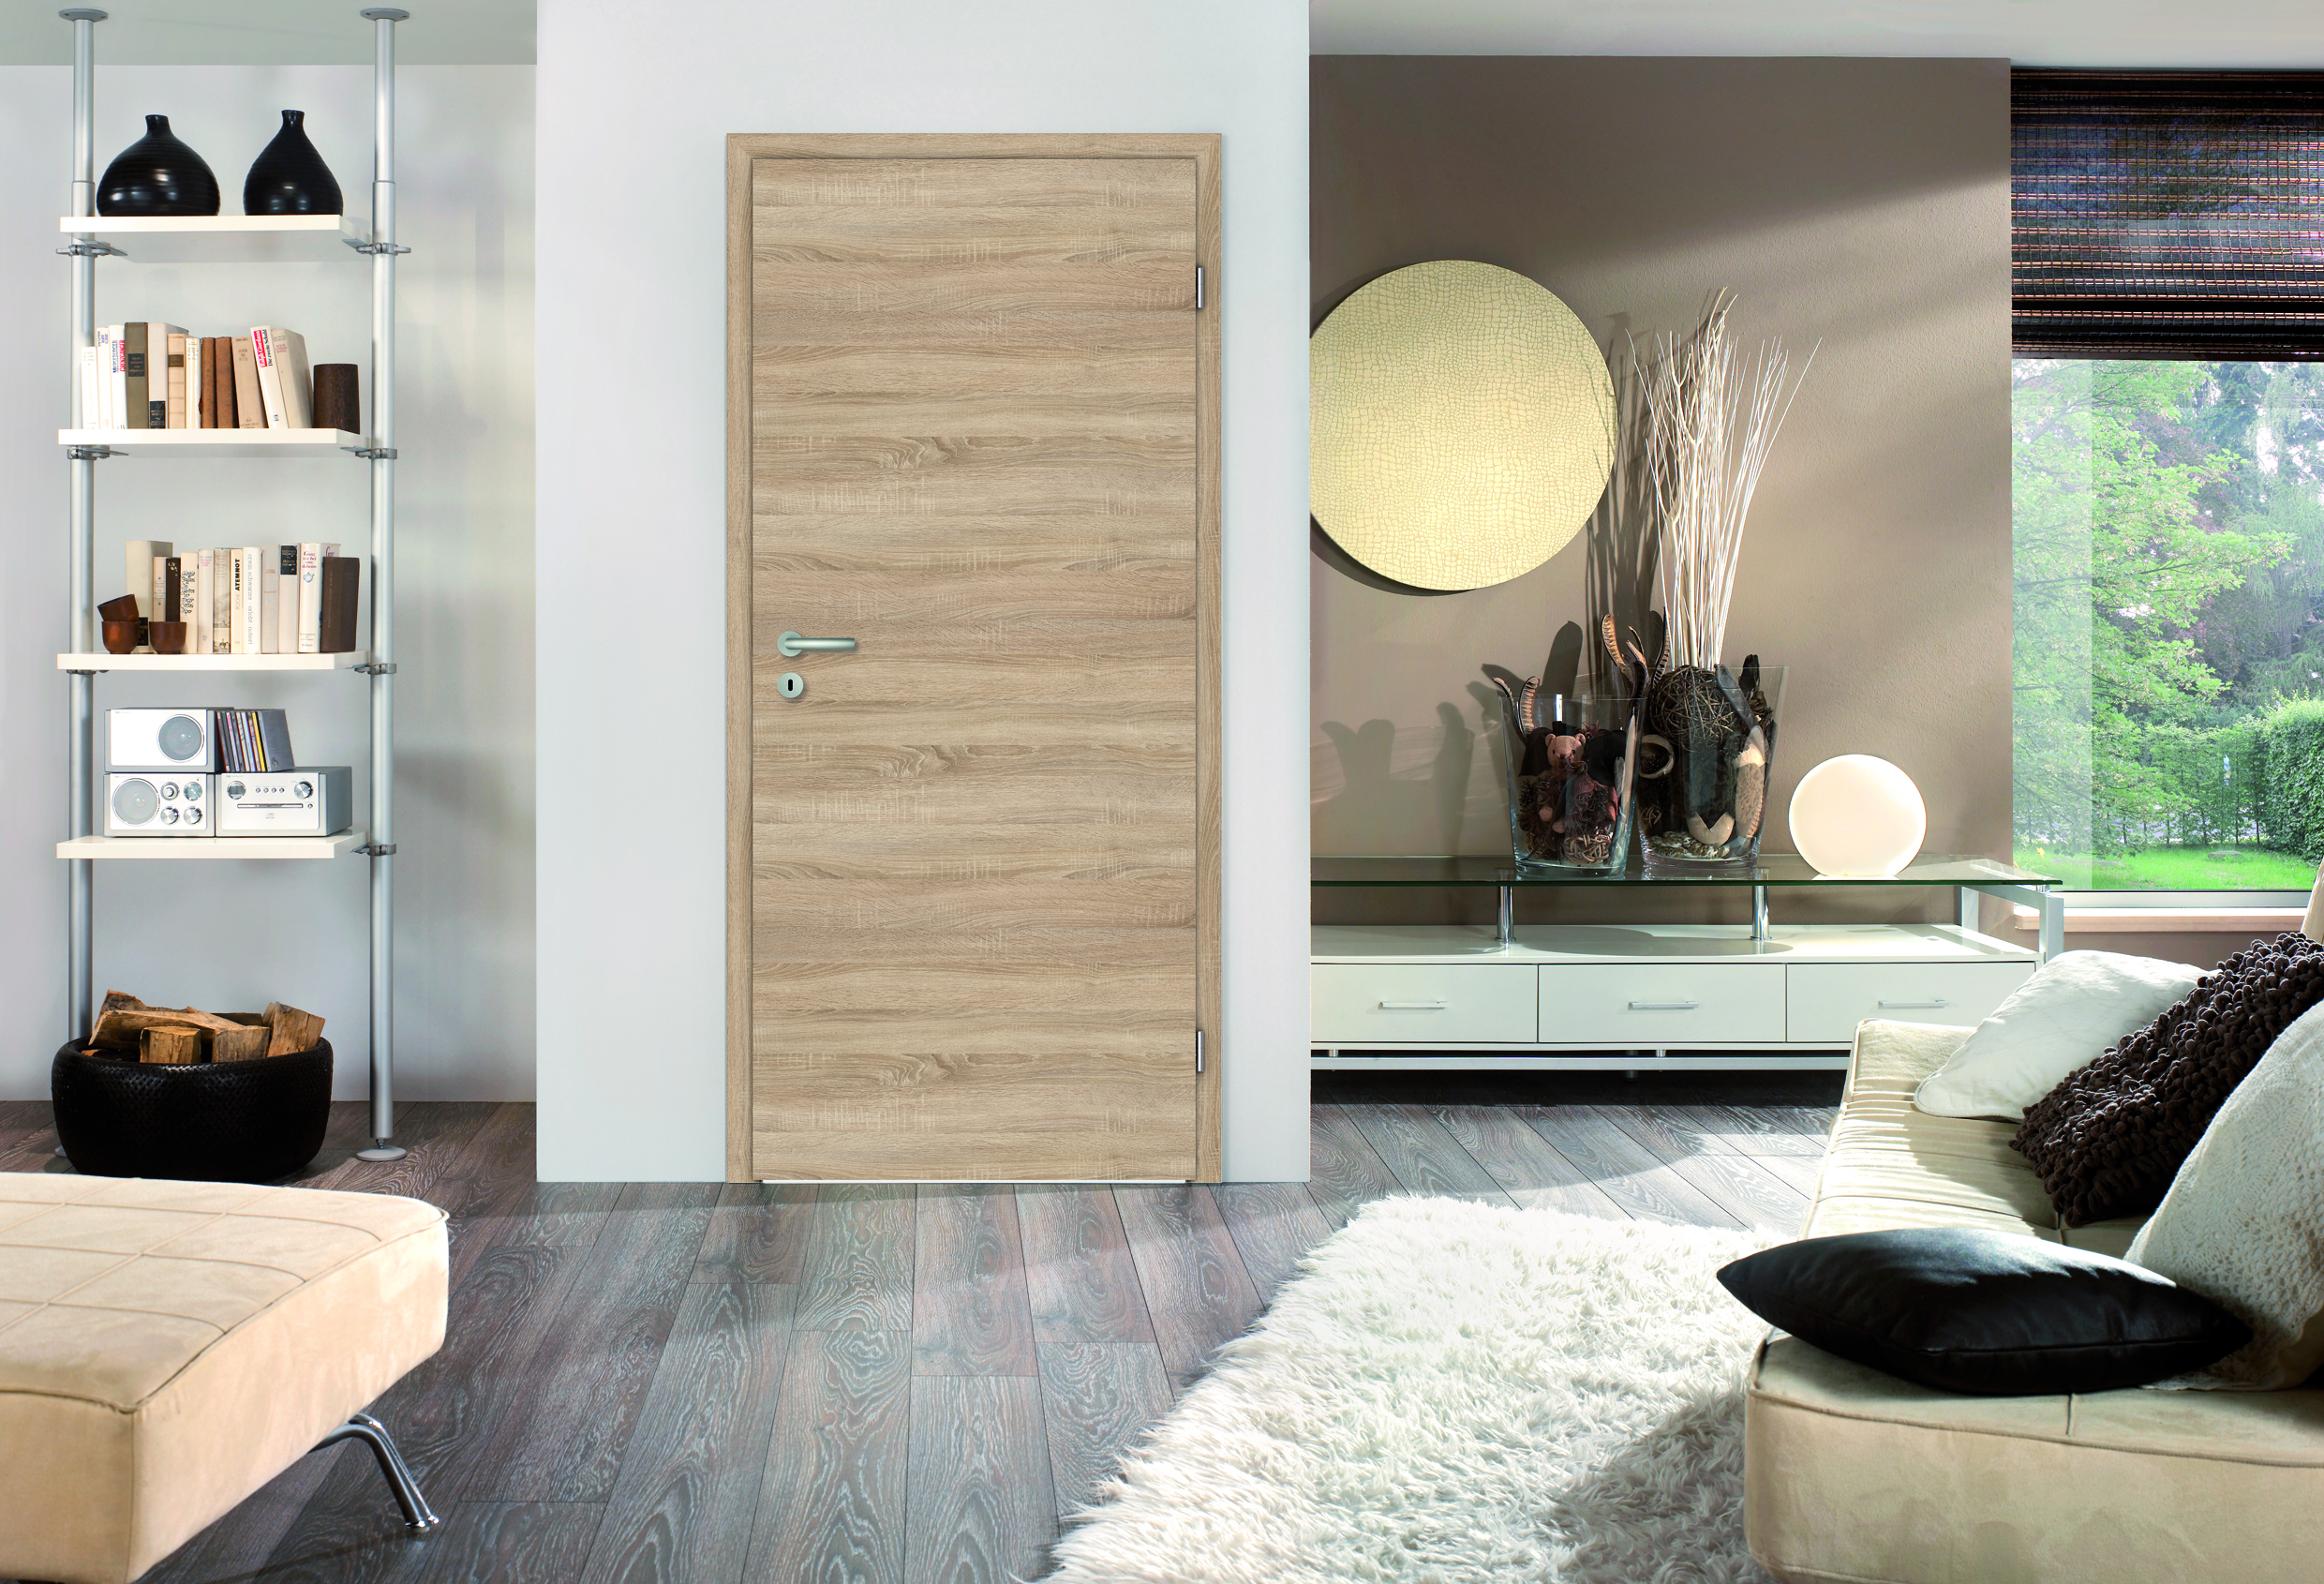 High quality interior door that enhances the uniqueness of the interior design of this home, in Oak Varnish.